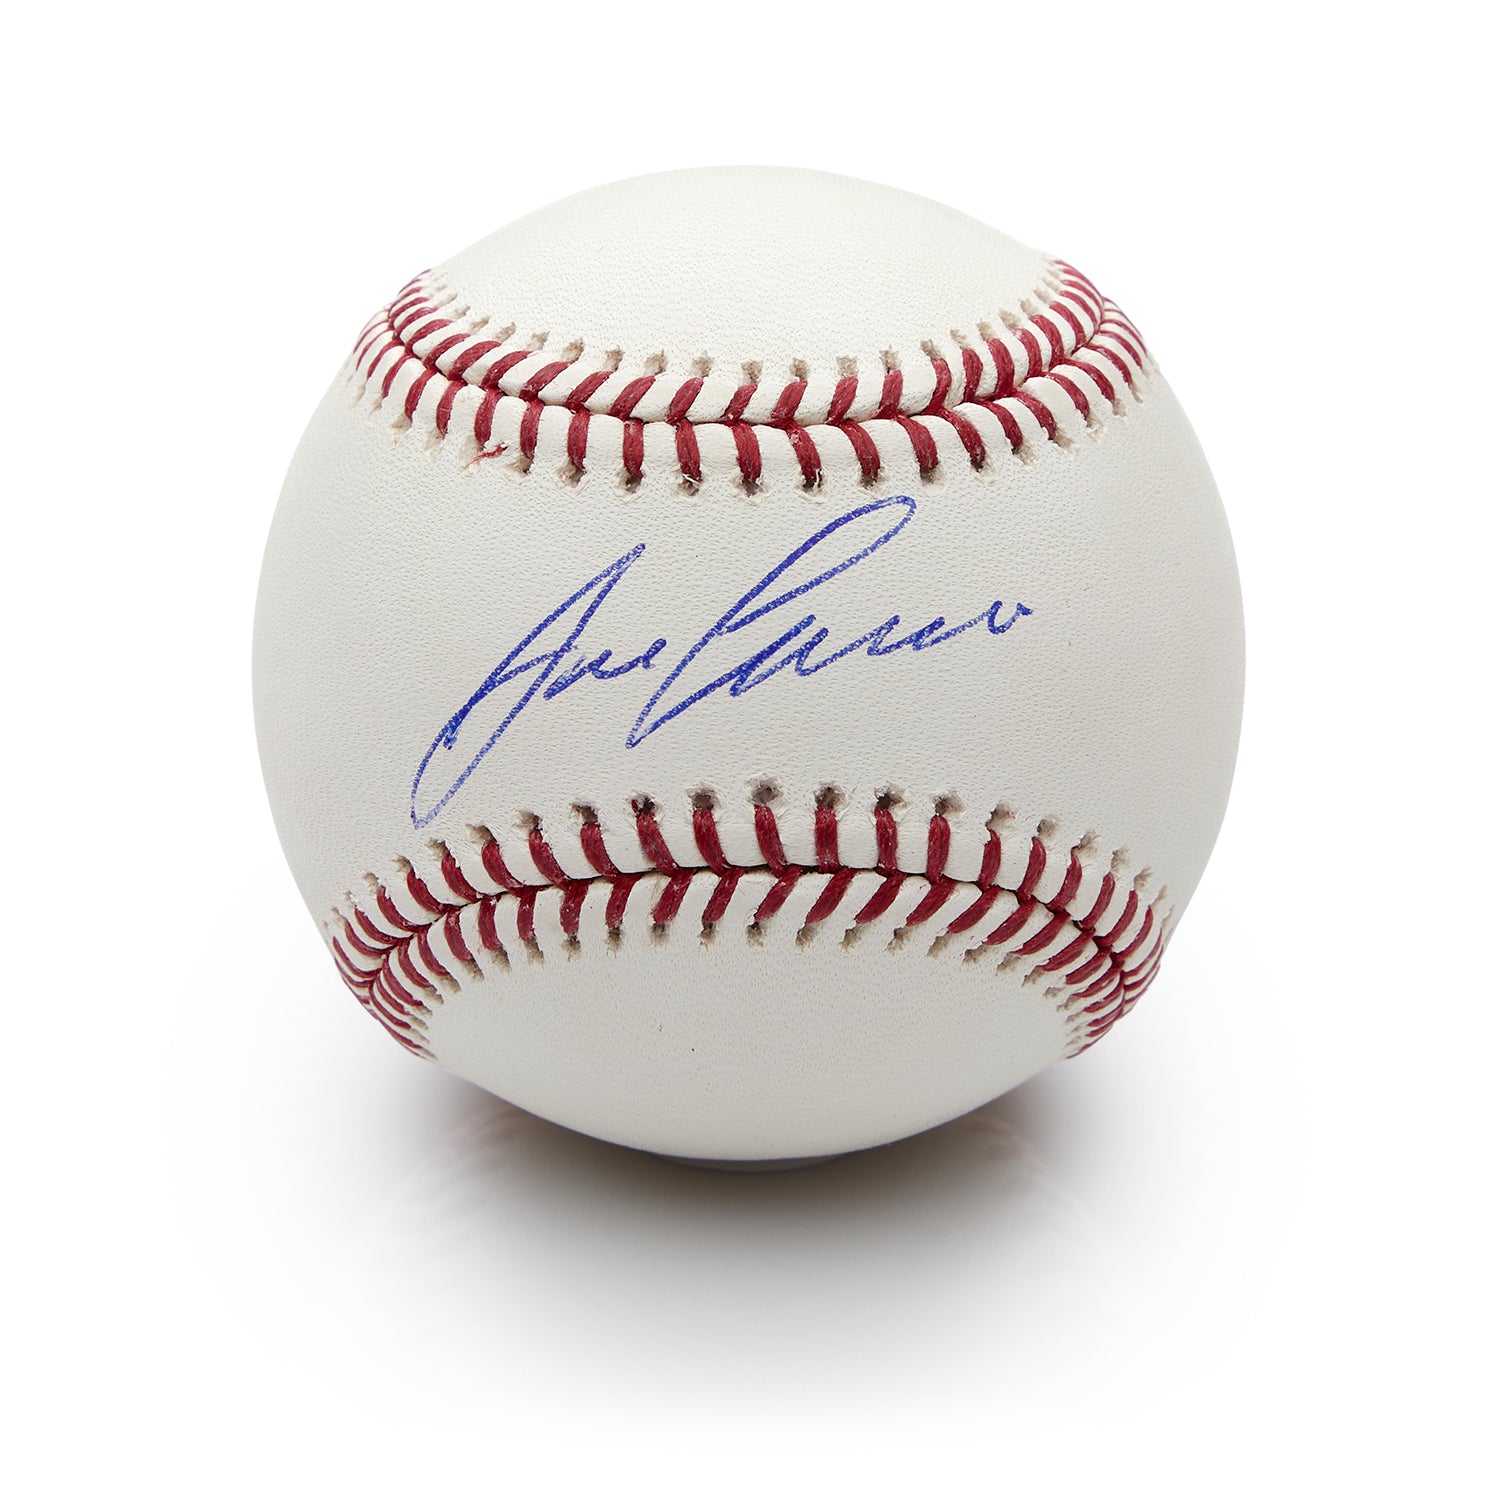 Jose Canseco Autographed Official MLB Rawlings Baseball